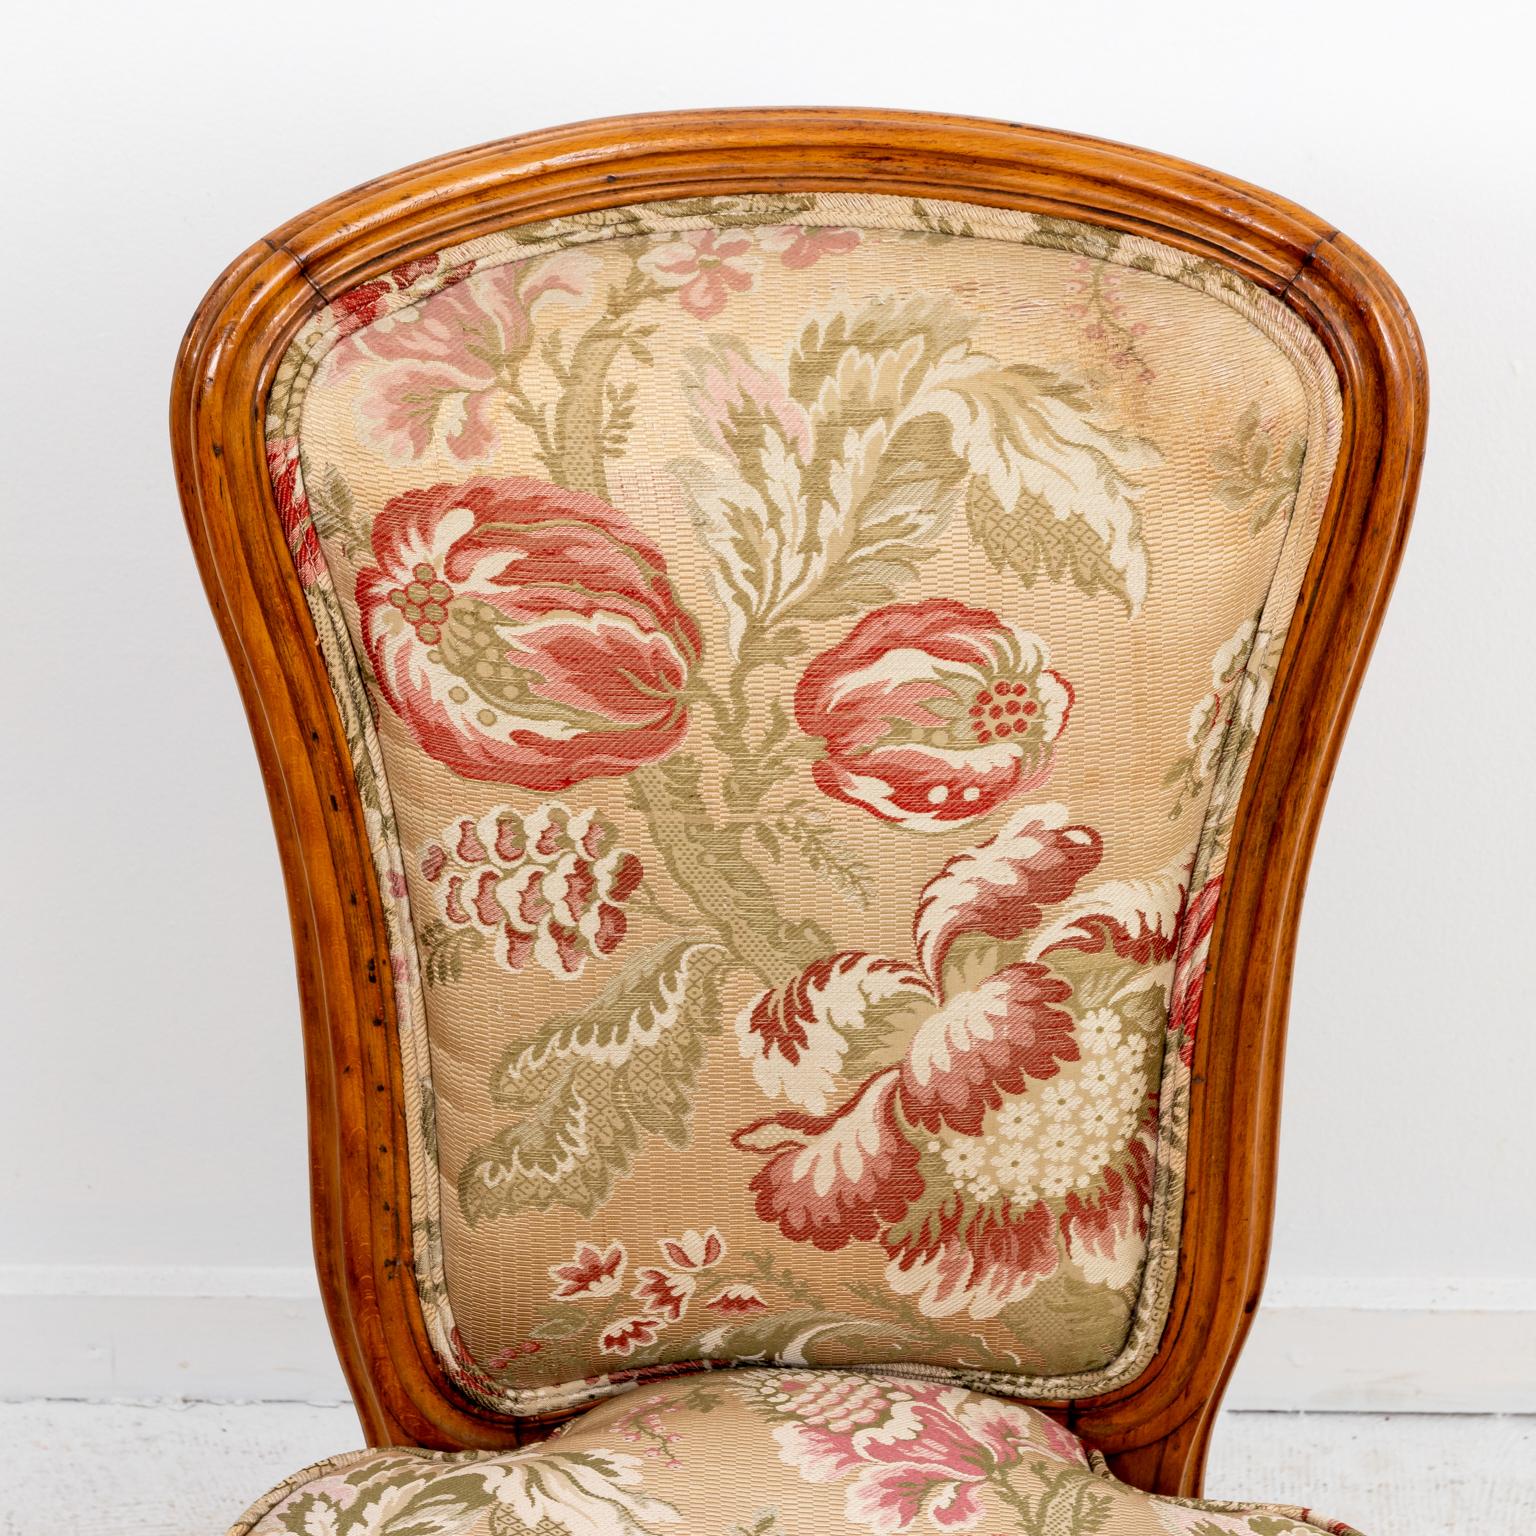 20th Century Upholstered Slipper Chair with Quilted Fabric